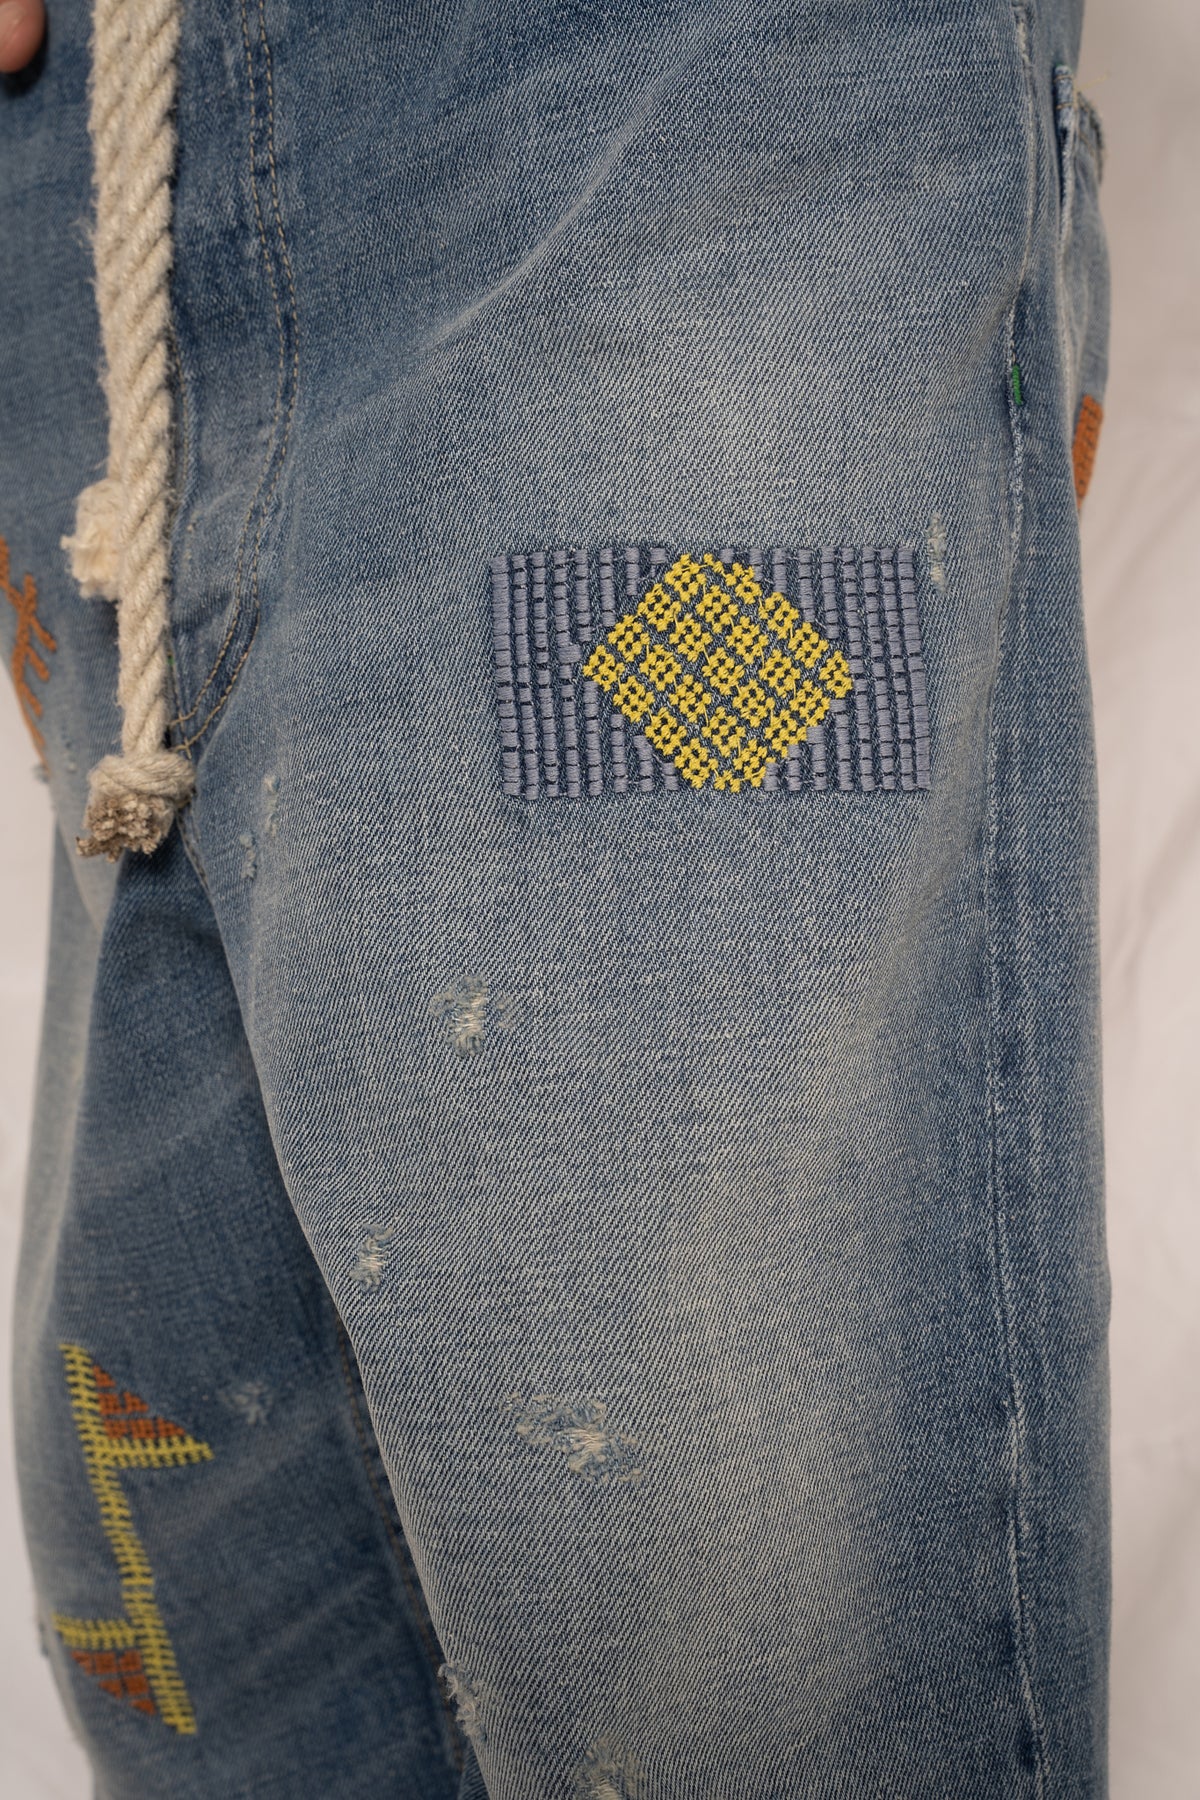 DR. COLLECTORS Embroidered Japanese Denim in Sunfaded Blue S